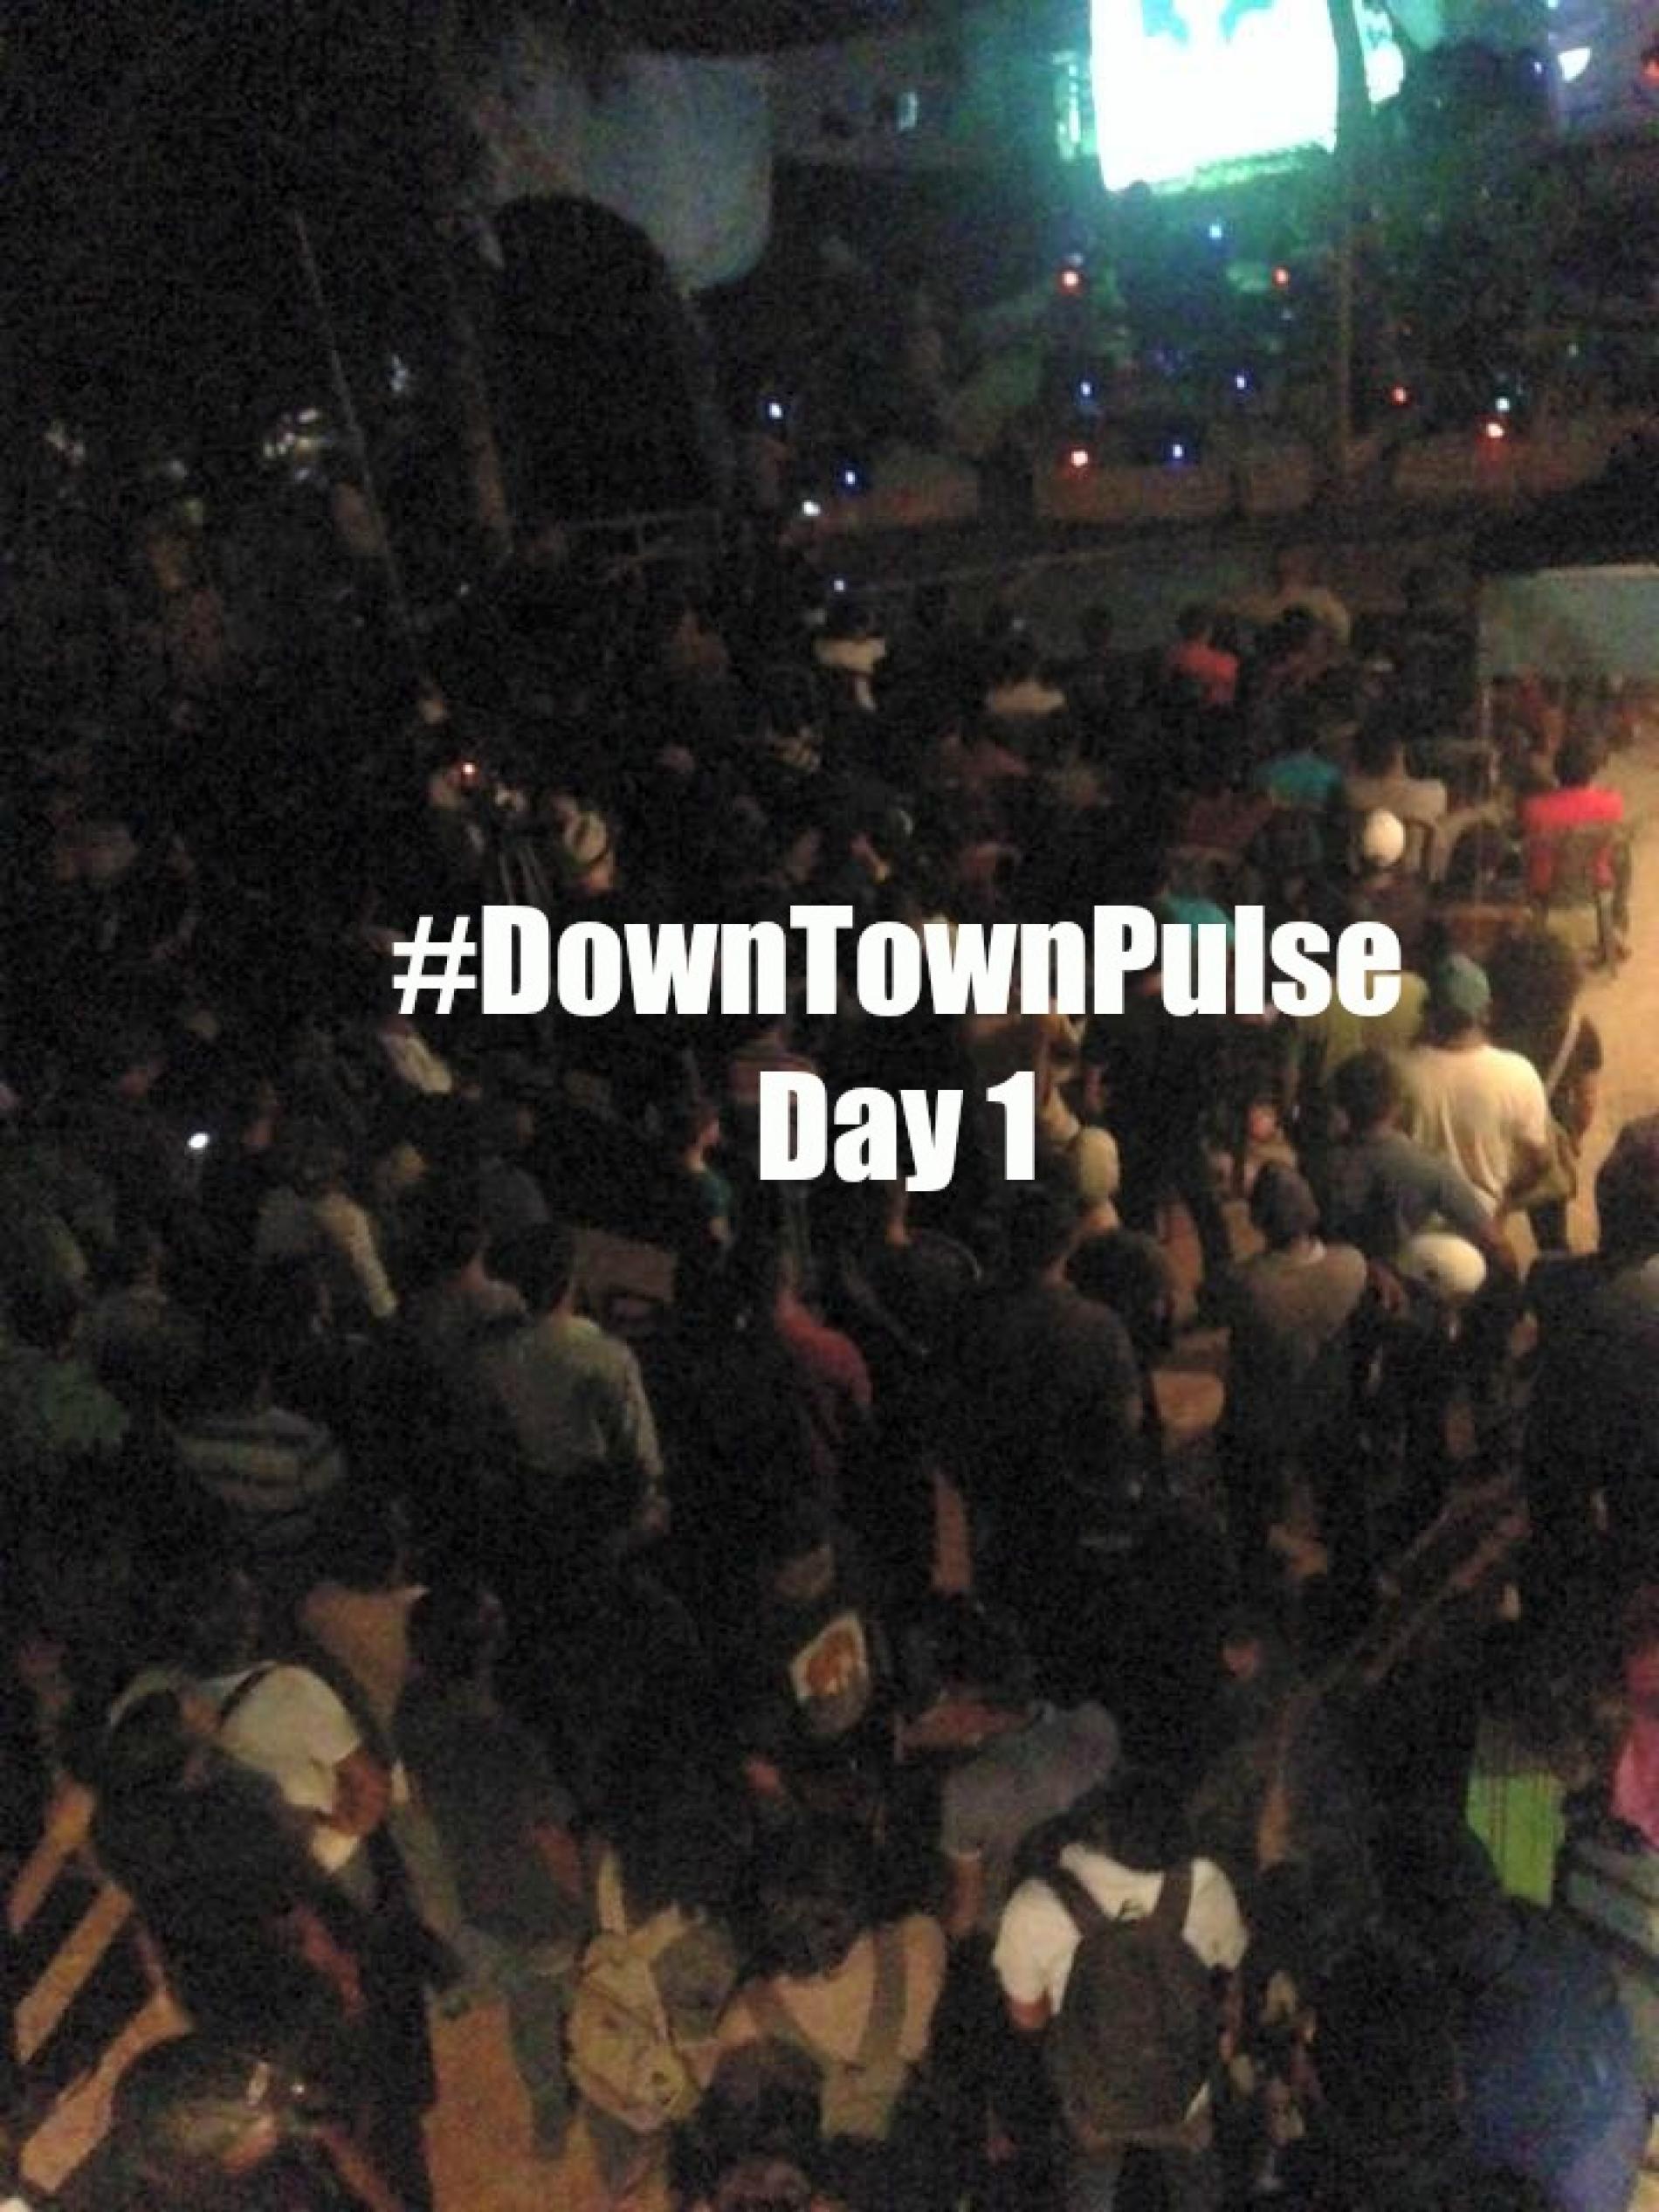 Missed Out On Day 1 Of Down Town Pulse? Here’s What You Missed